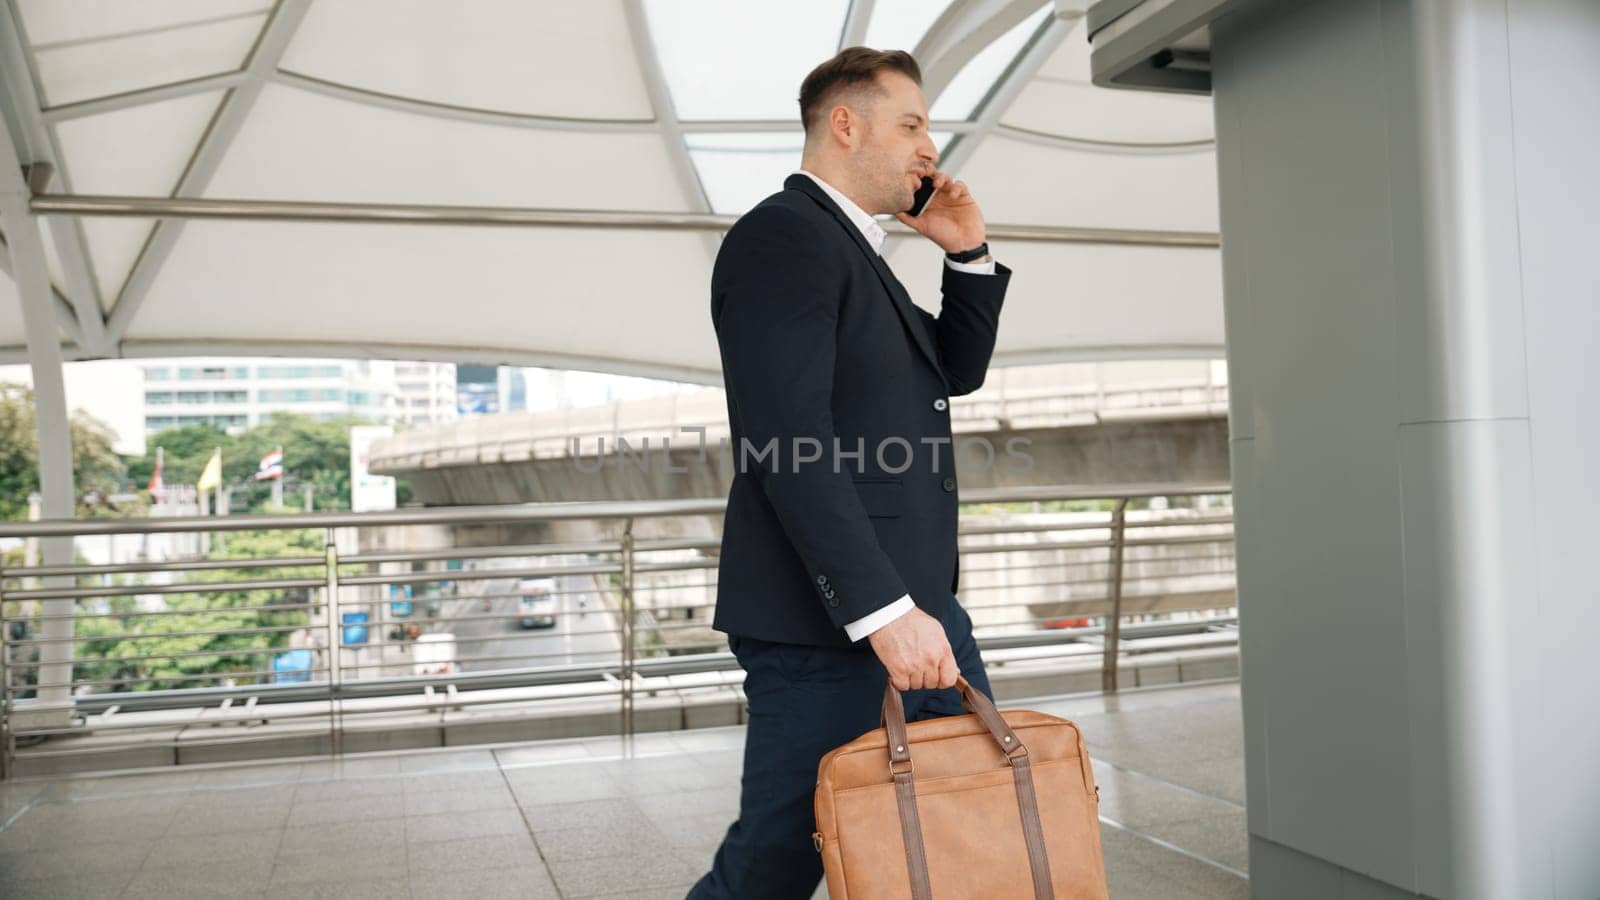 Smart caucasian businessman calling his colleague to plan financial strategy while walking to workplace. Side view of manager using mobile phone to communicate with marketing team. Lifestyle. Urbane.